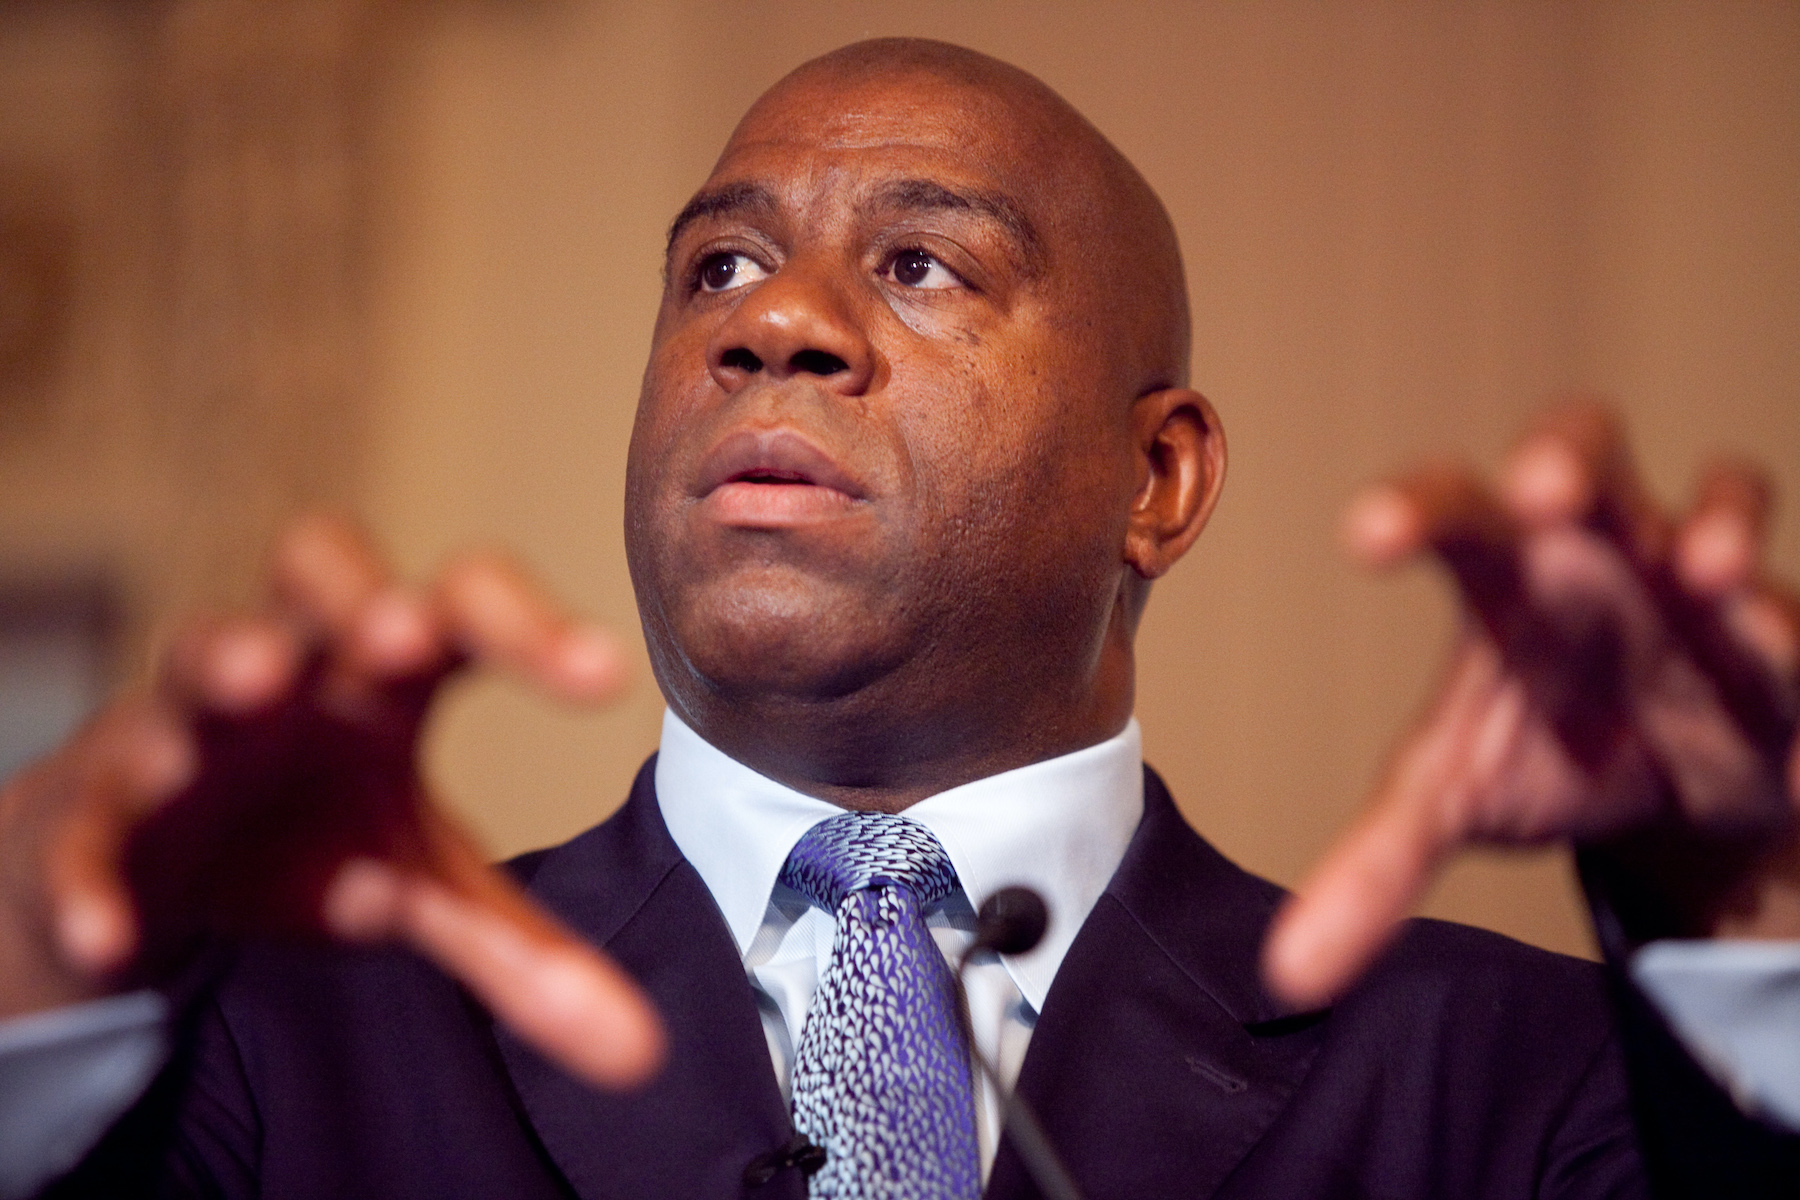 Magic Johnson Has Survived More Than 30 Years With HIV Thanks to a Once-Experimental Drug Cocktail